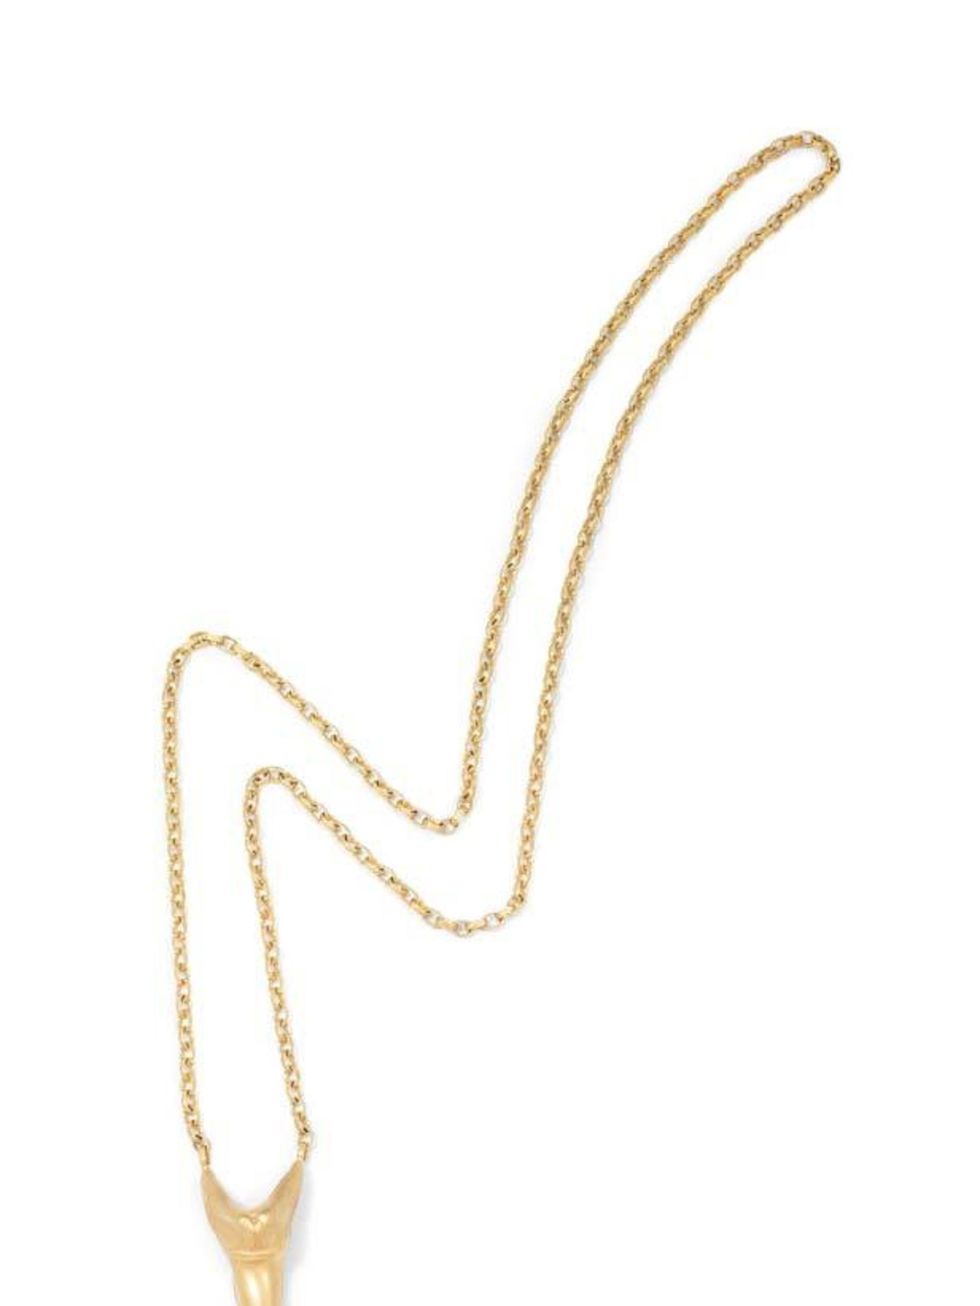 <p>Swap the festive statement necklaces for something more subtle like this uber-cool fang necklace - perfect for giving luxe edge to jersey basics. Hannah Warner gold fang necklace, £170, at <a href="http://www.seftonfashion.com/shopping/cat-necklaces/it